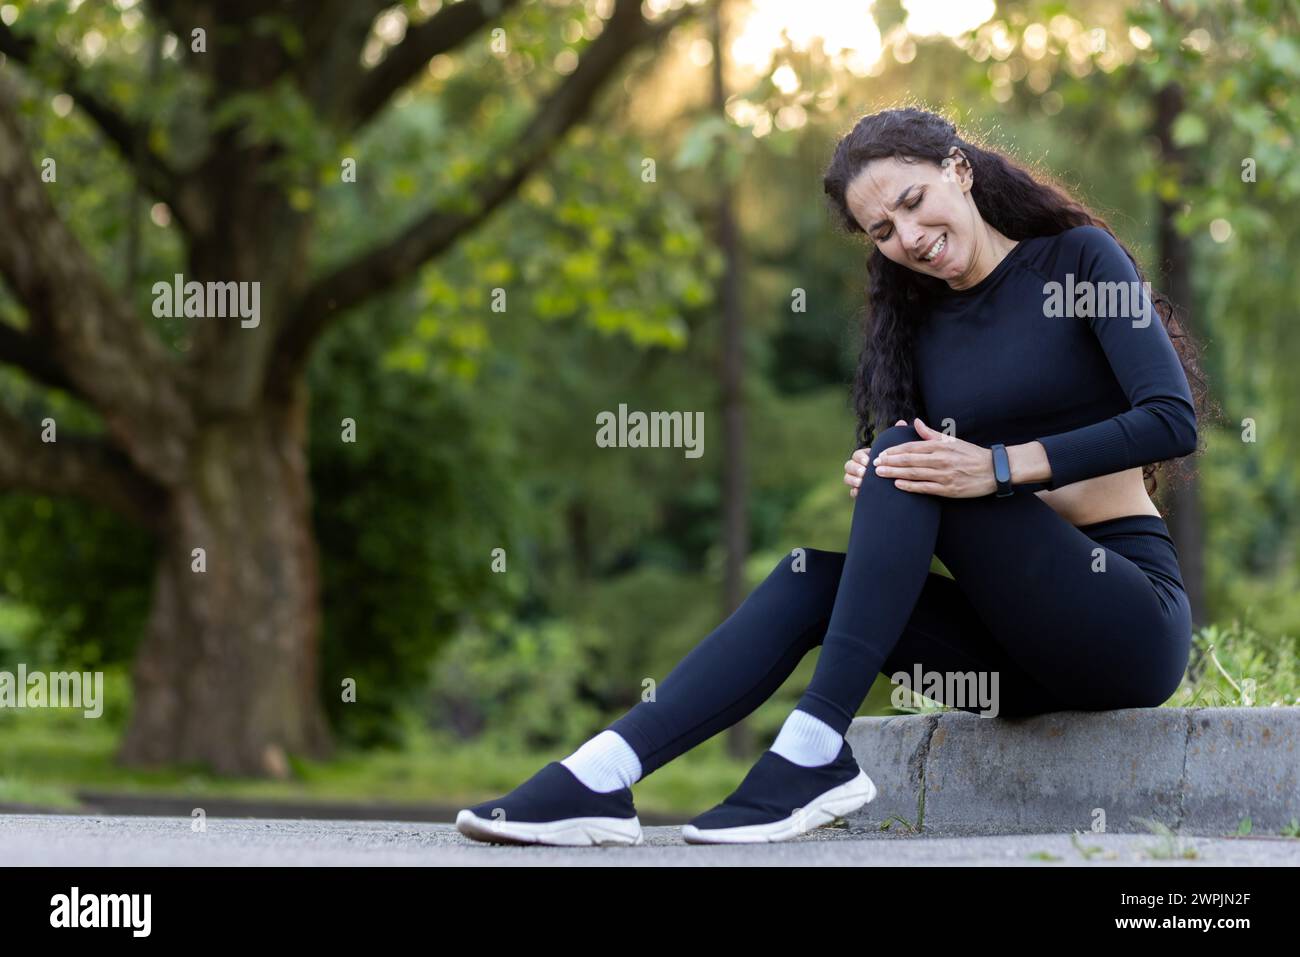 Active woman outdoors holding her knee with a pained expression, indicating a sports injury during workout. Stock Photo